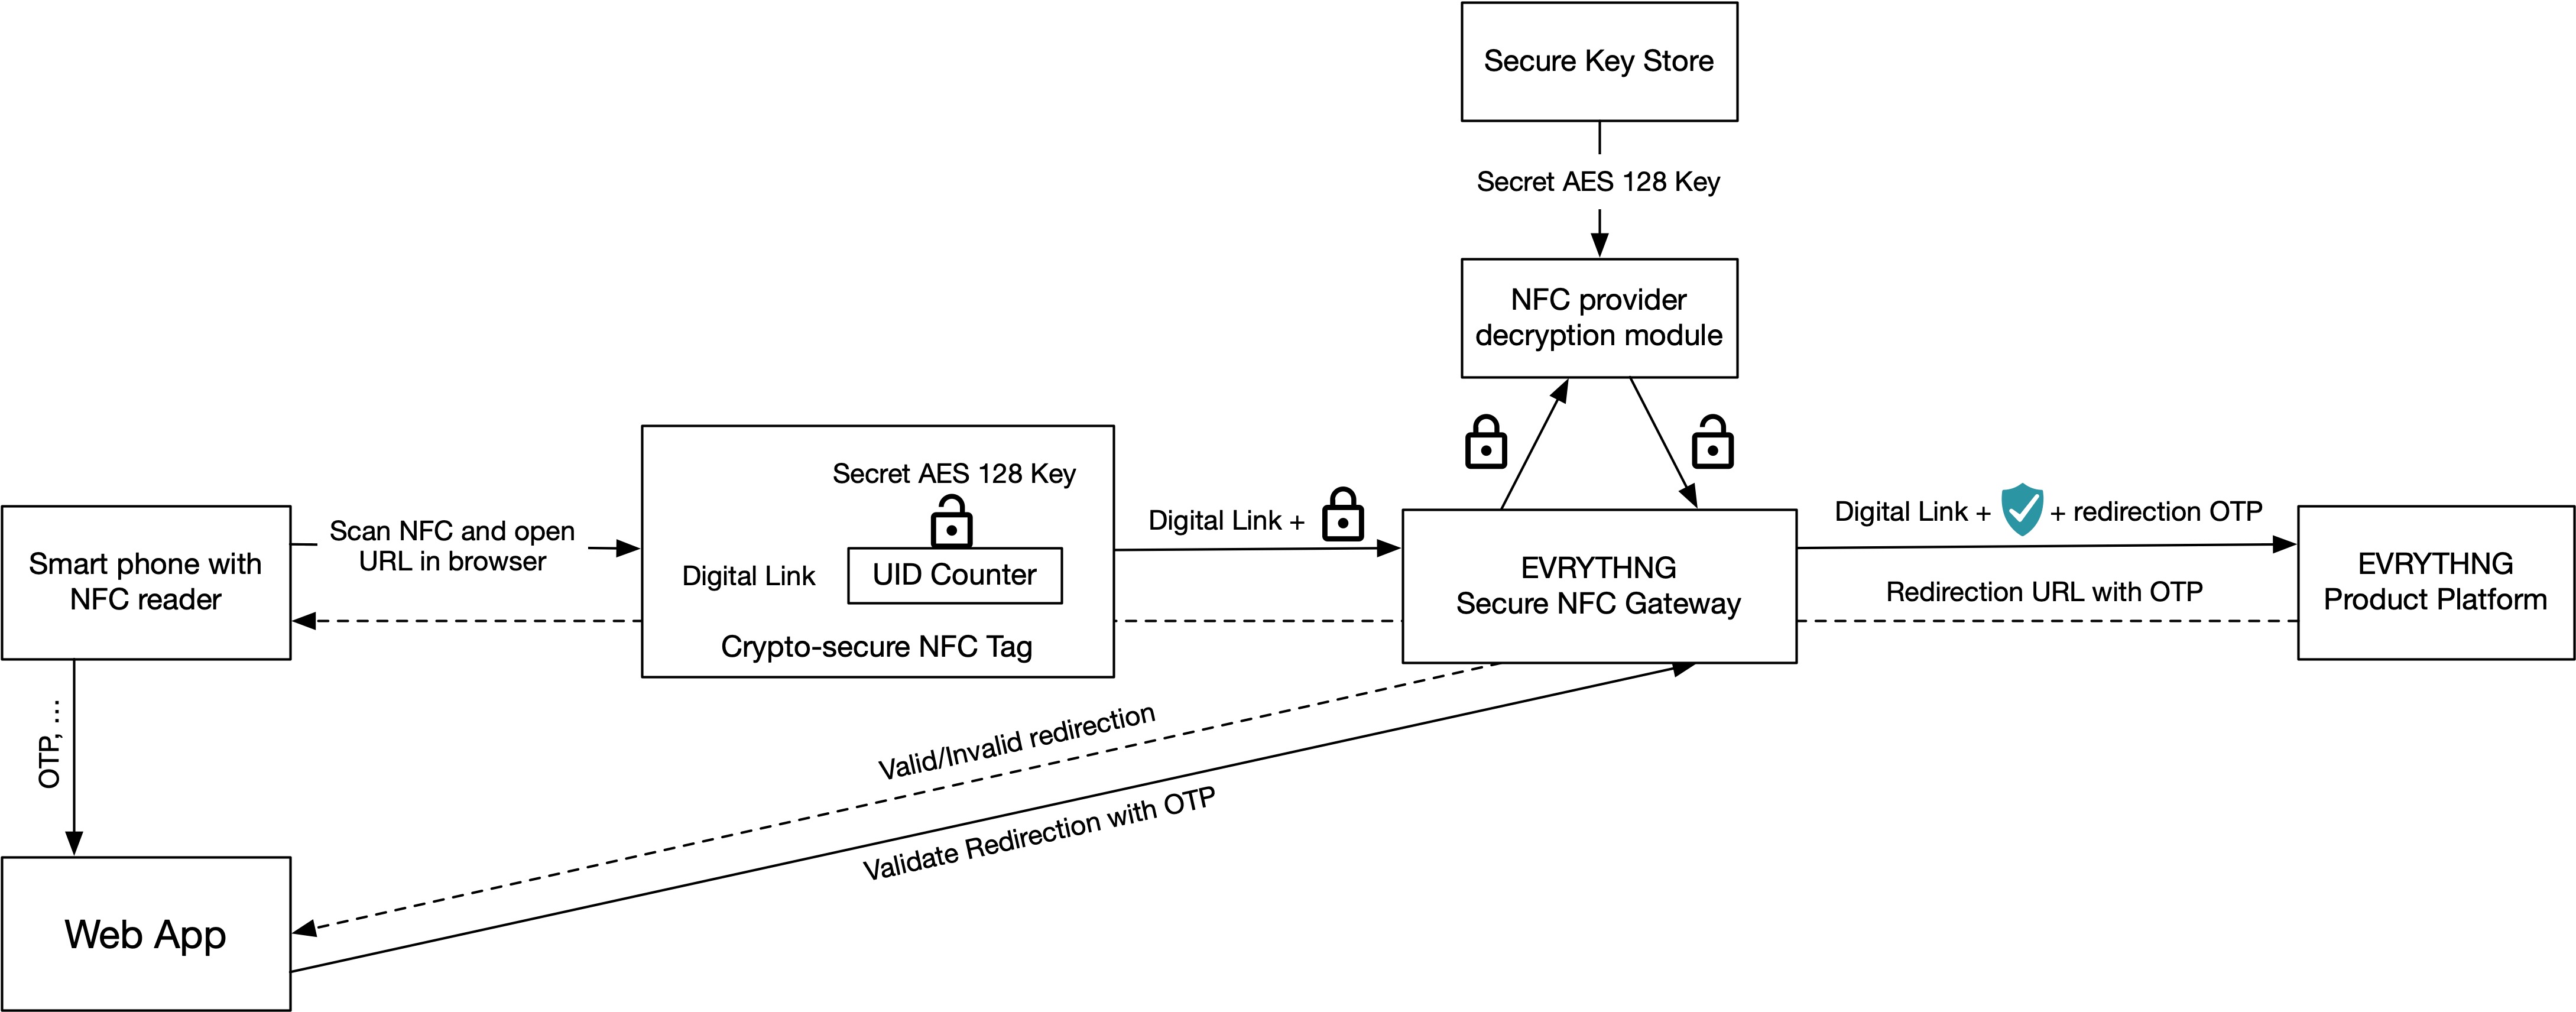 EVRYTHNG Secure NFC Gateway architecture